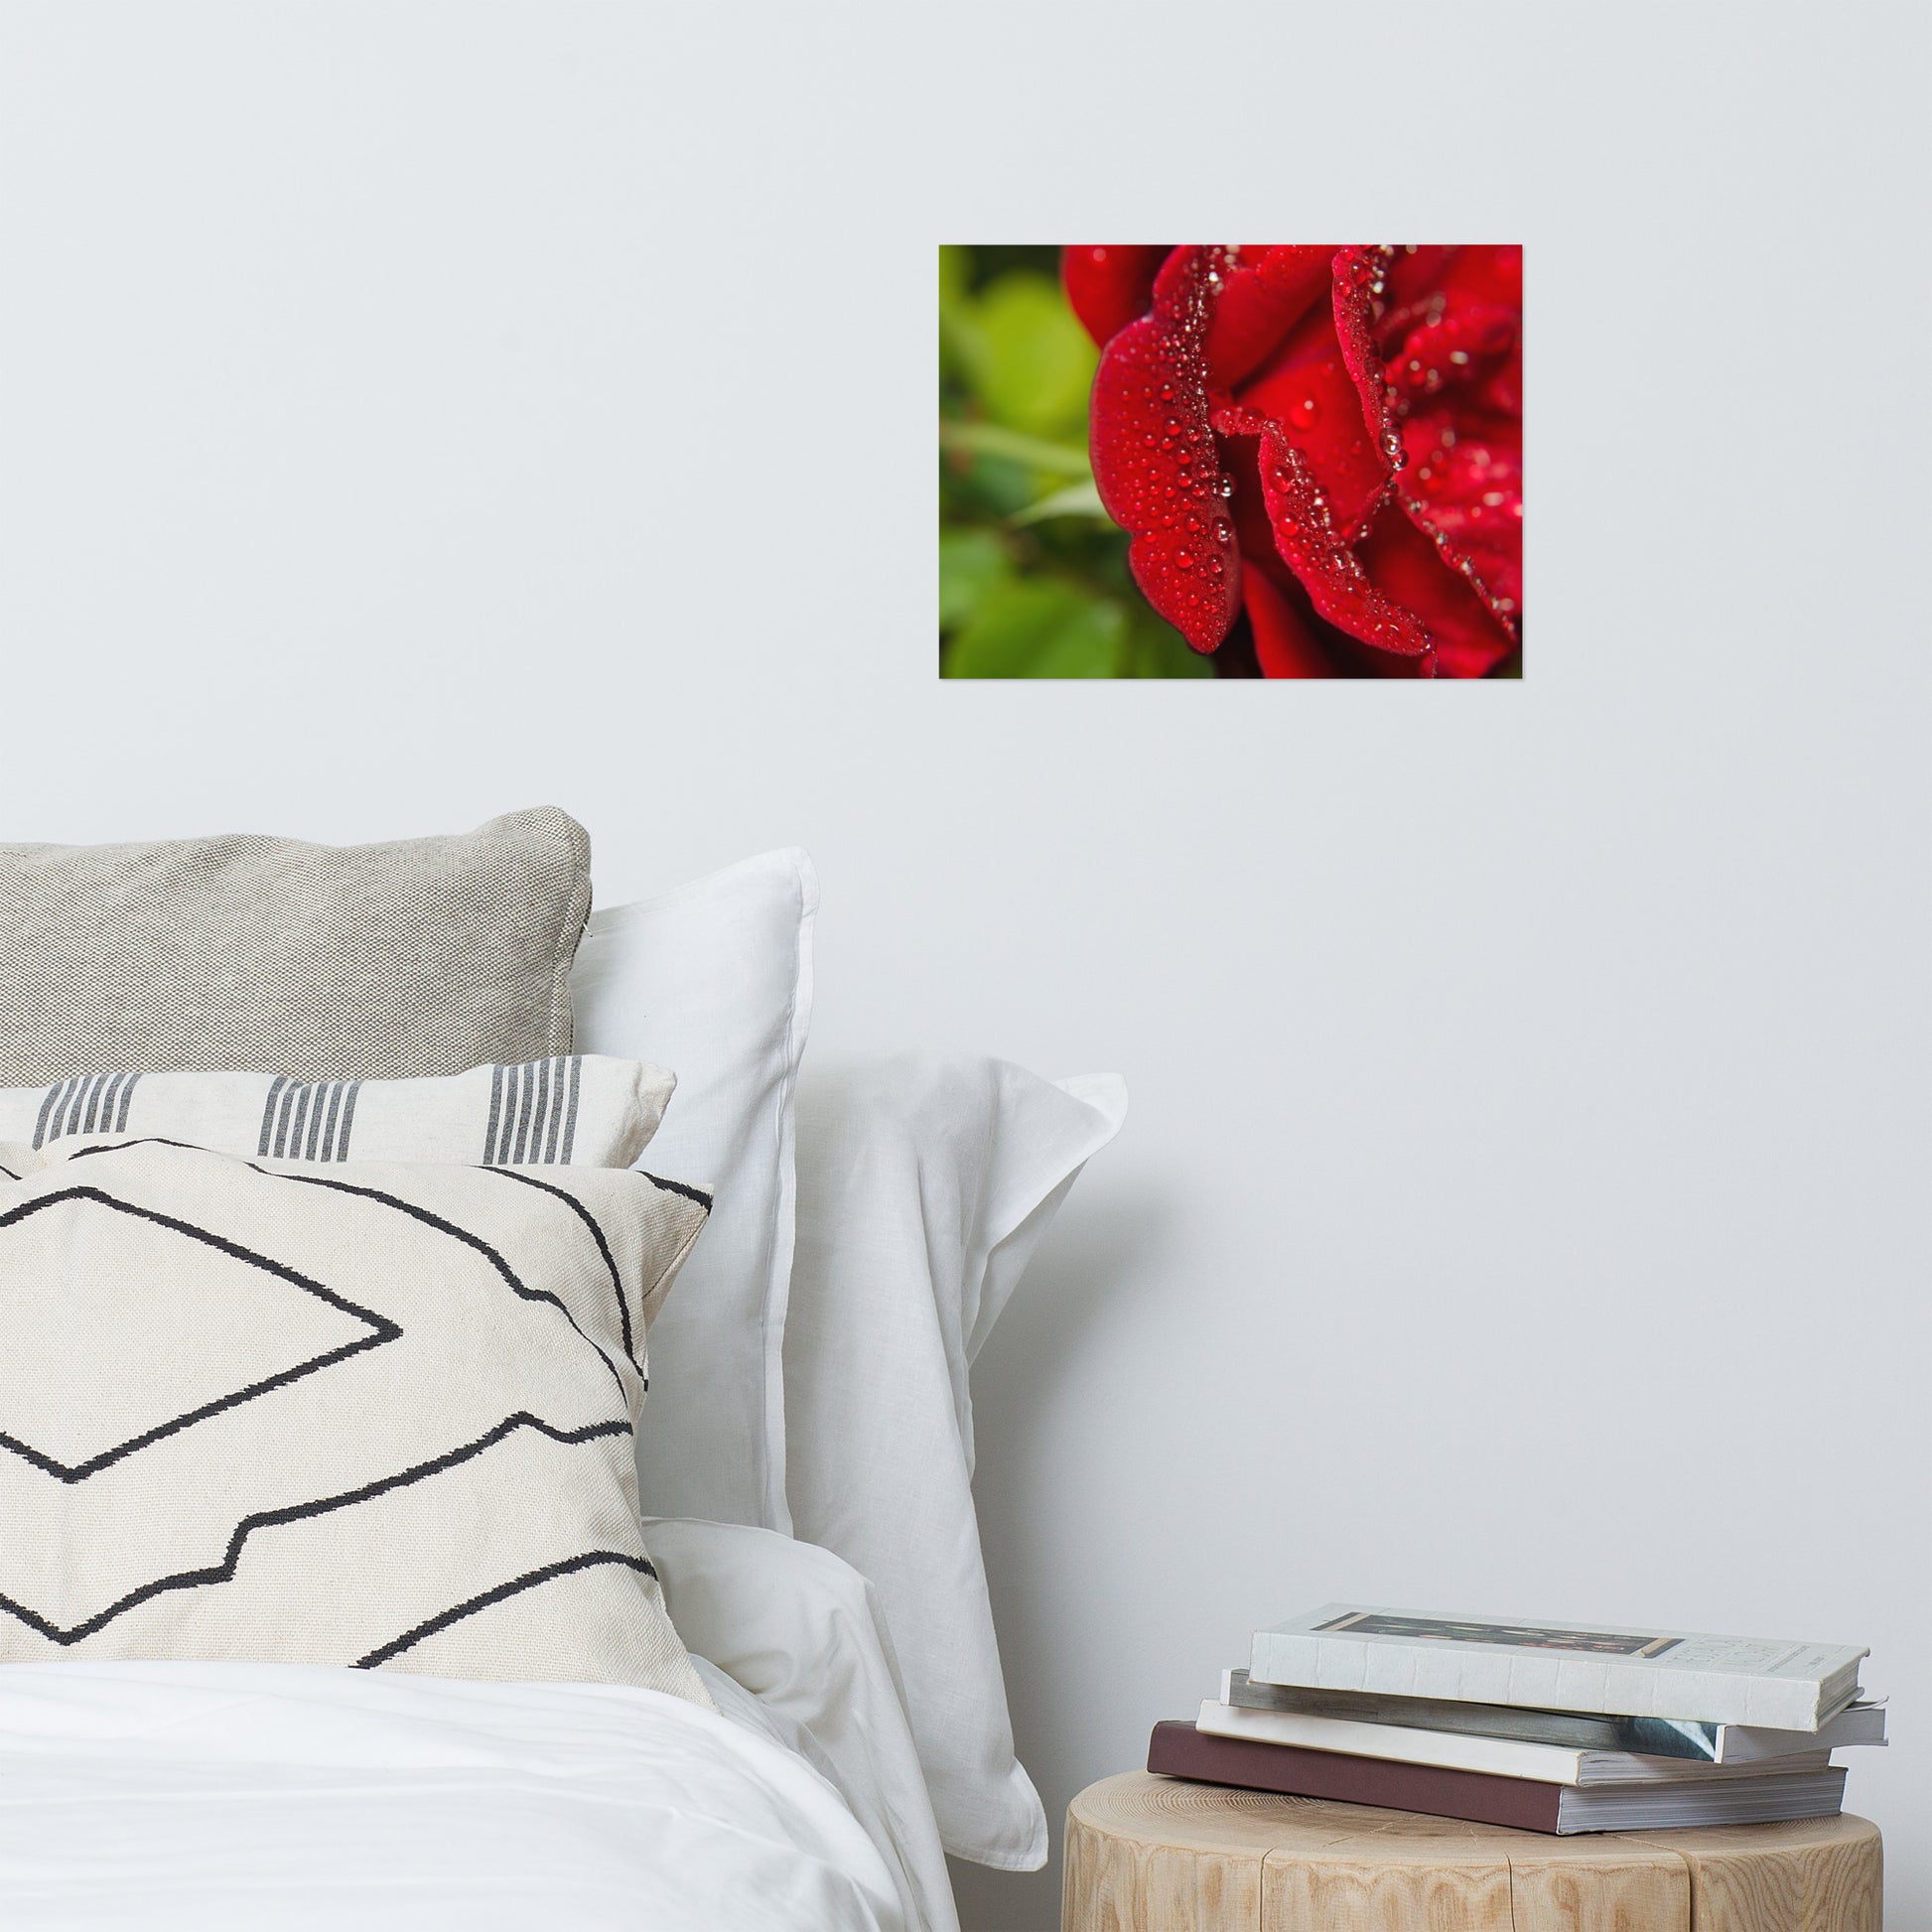 rose wall picture: Bold and Beautiful - Floral / Flora / Flowers / Nature Photograph - Loose / Frameable / Unframed / Frameless Wall Art - Artwork